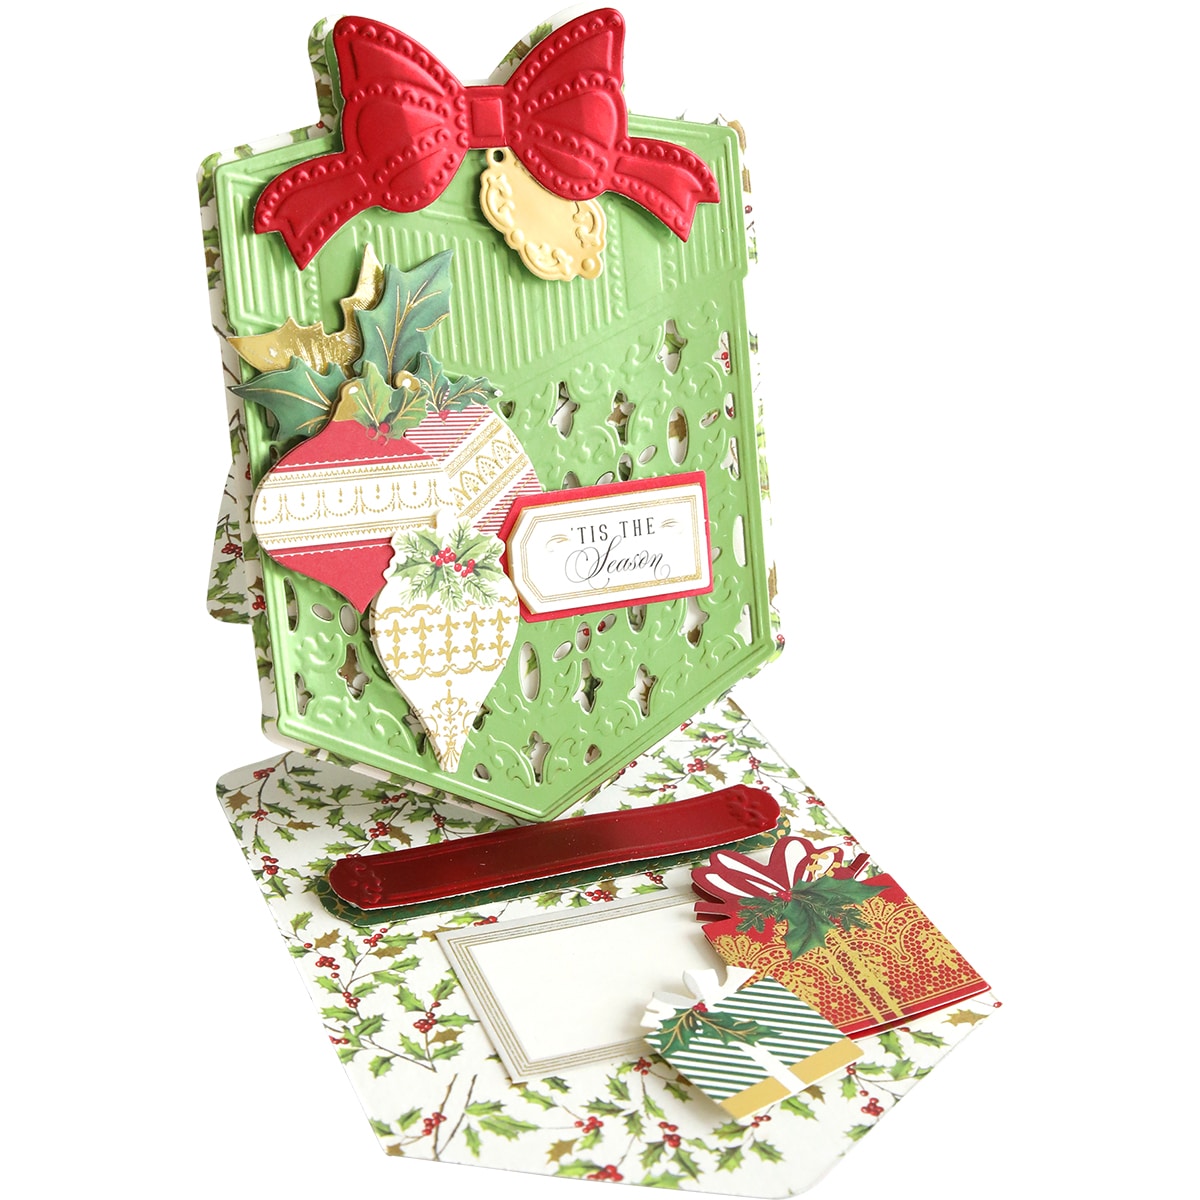 A christmas card with a bow and decorations.